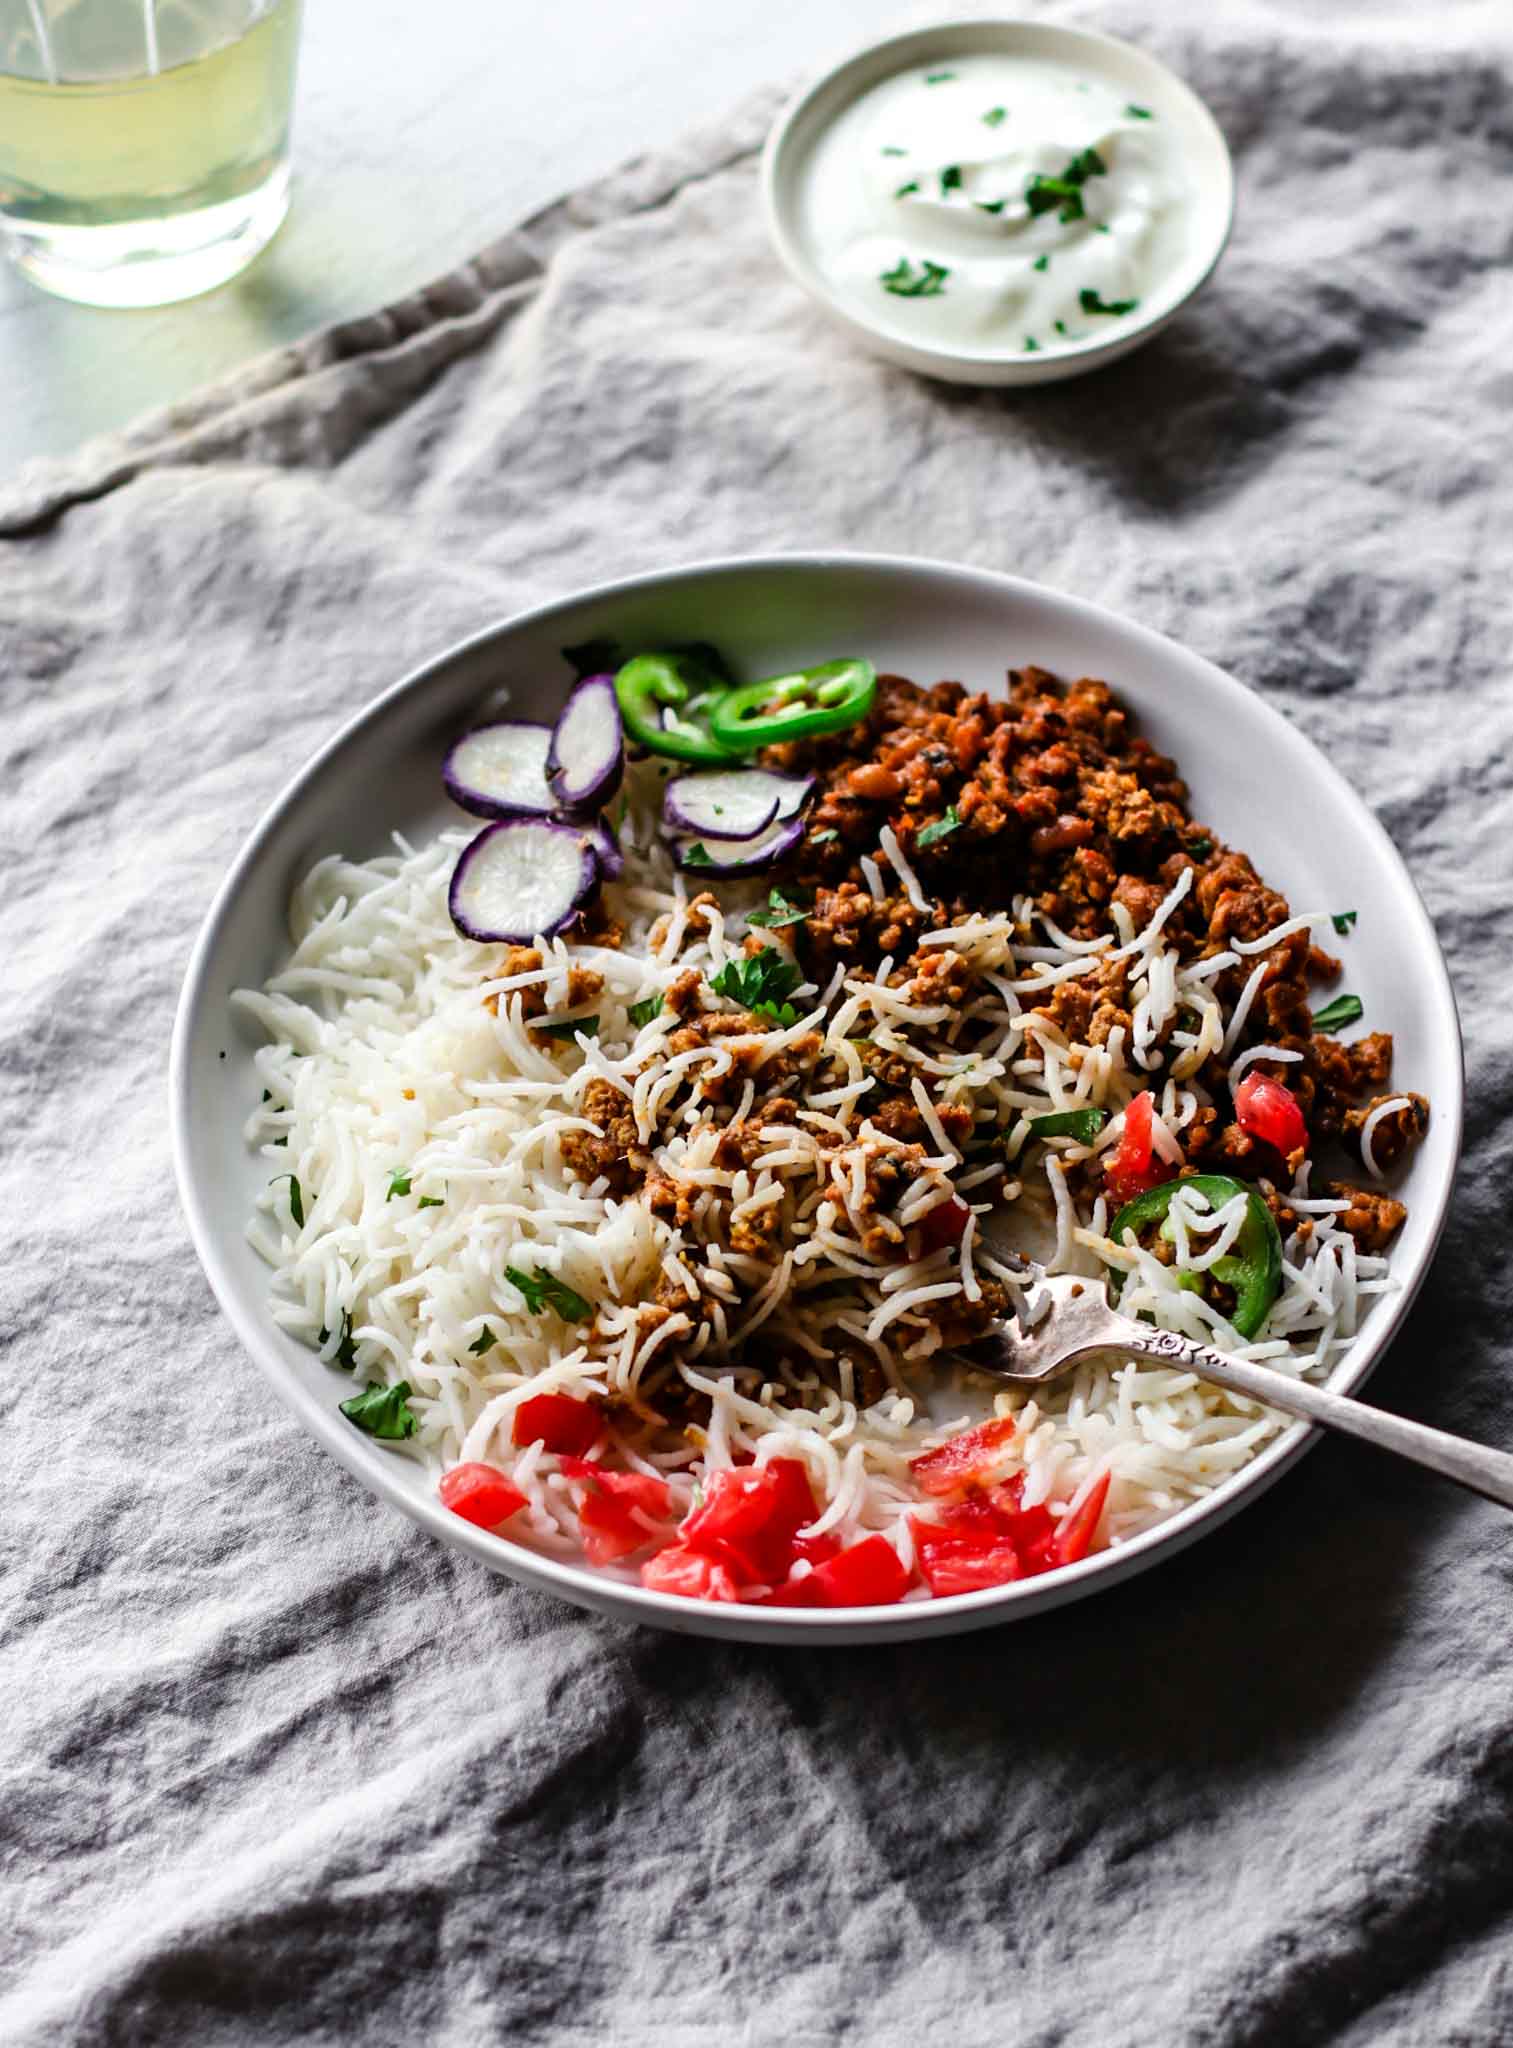 Keema Lobia mixed with rice on a white plate with a silver fork, vegetables, and yogurt on the side